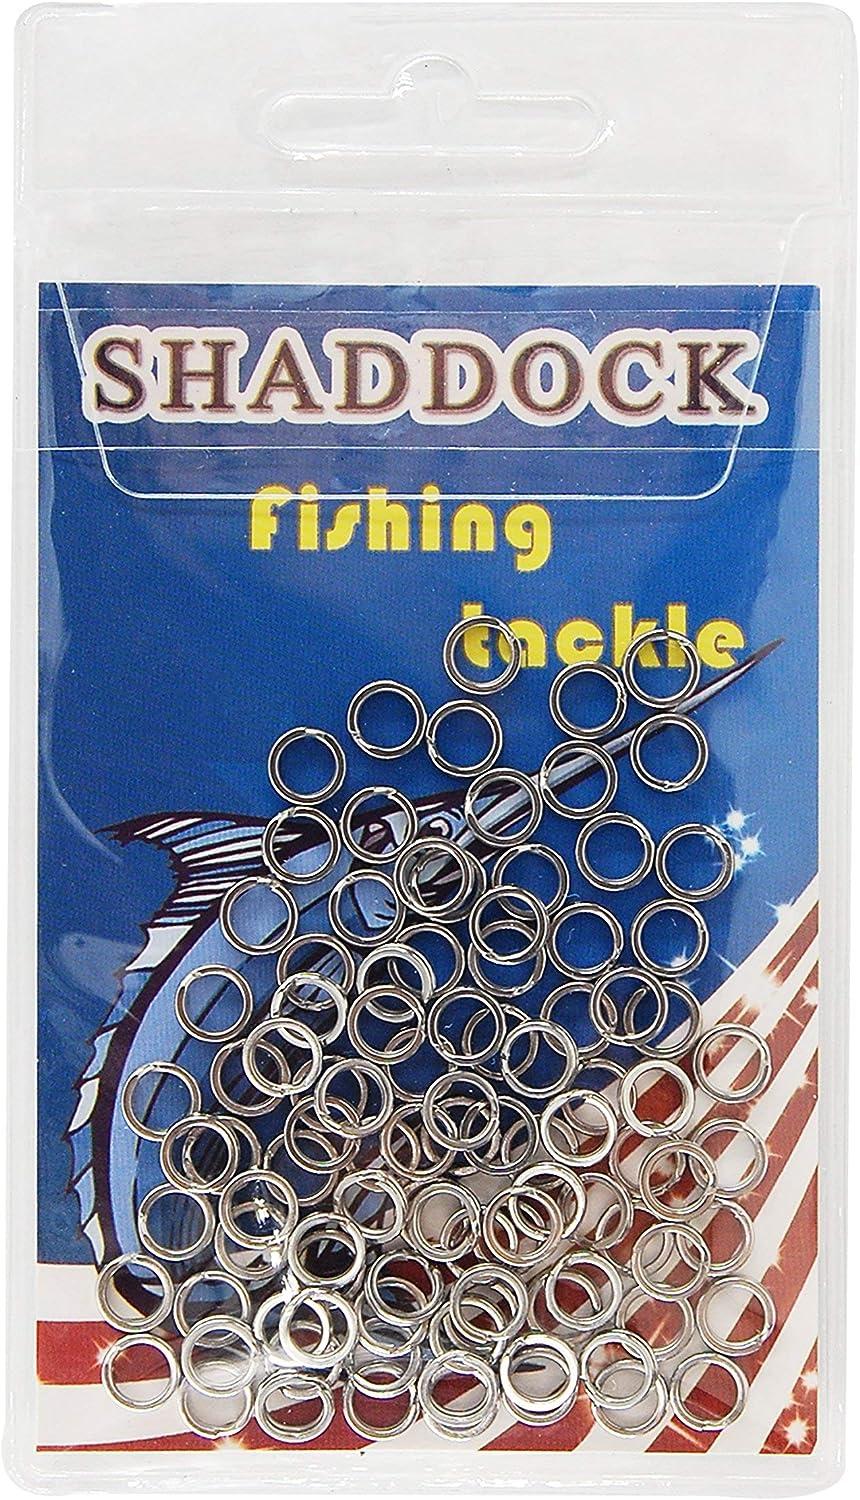 HEAVY DUTY STAINLESS Steel Split Rings Ideal for Heavy Lures and Baits  $13.02 - PicClick AU